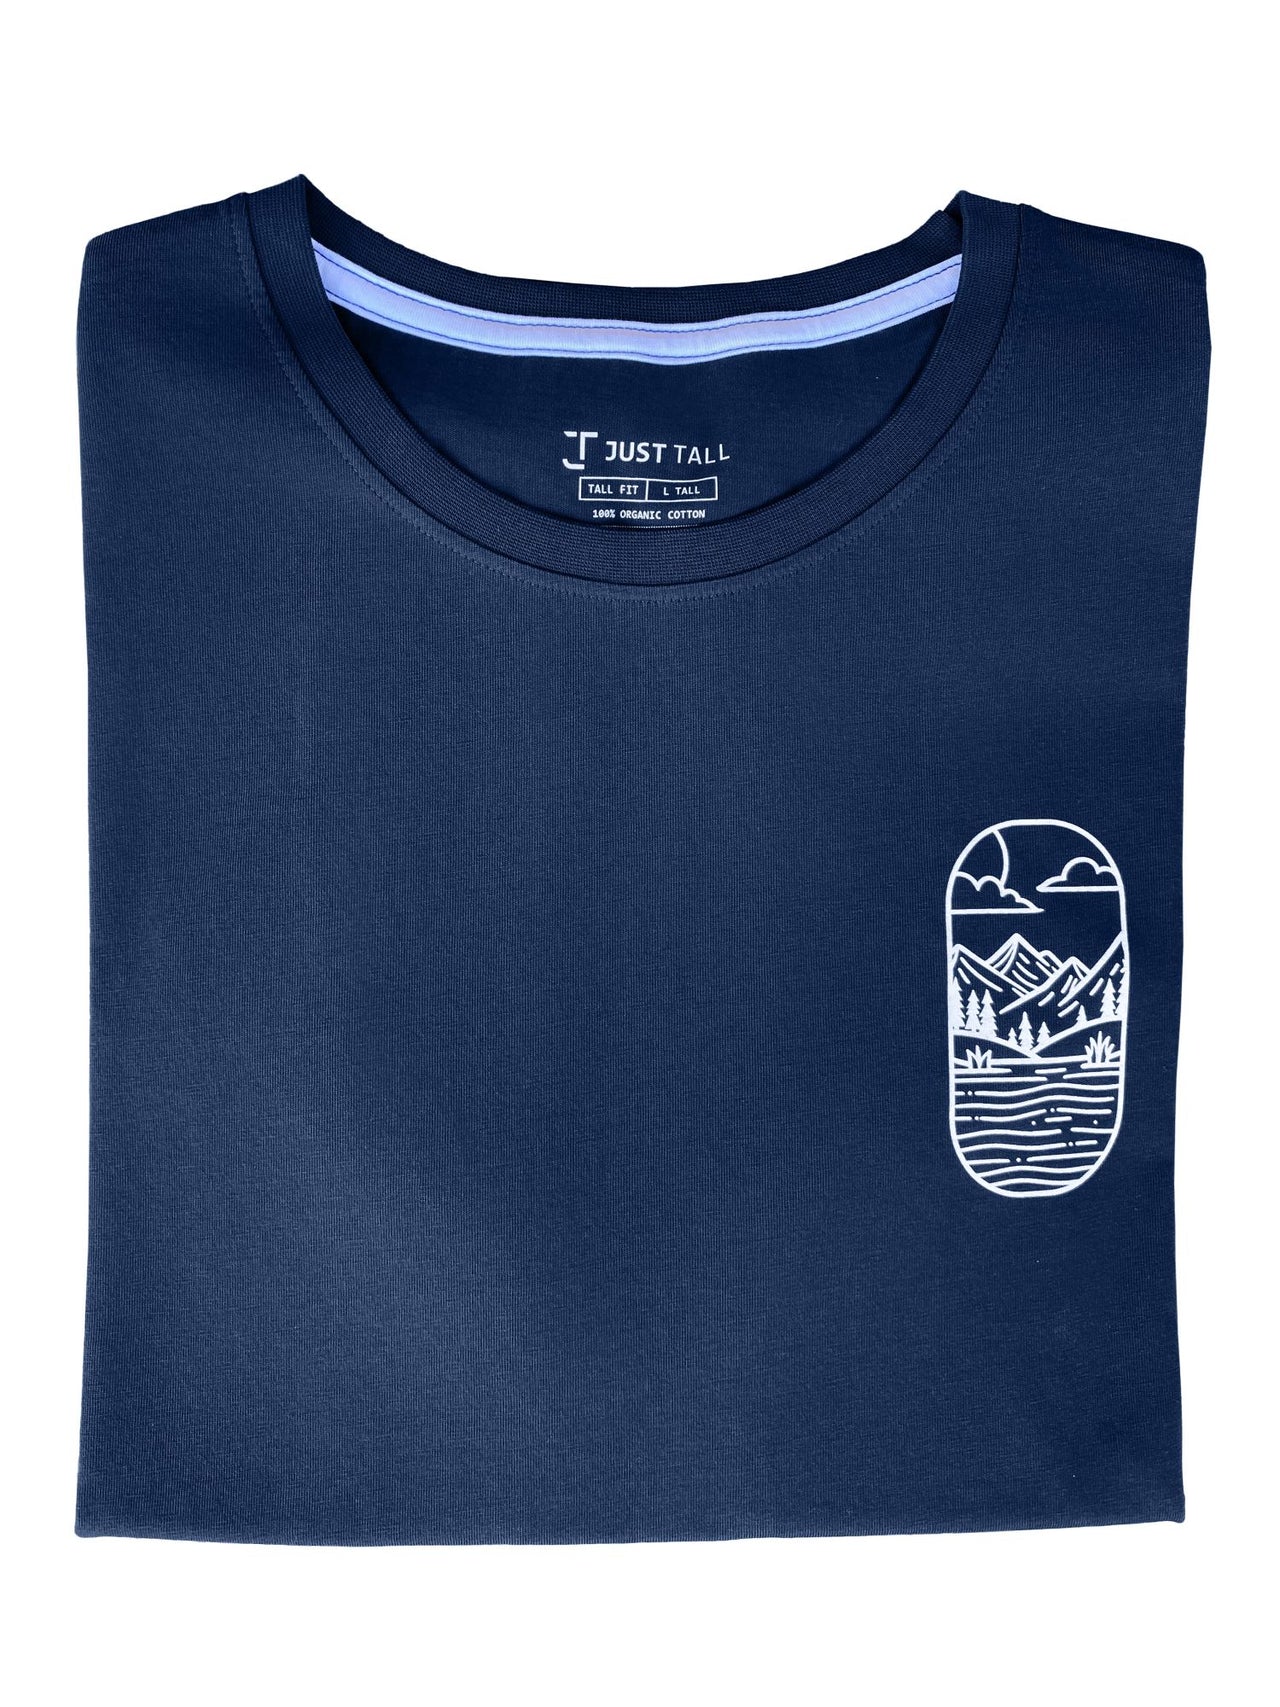 A close up of a tall navy graphic t-shirt.